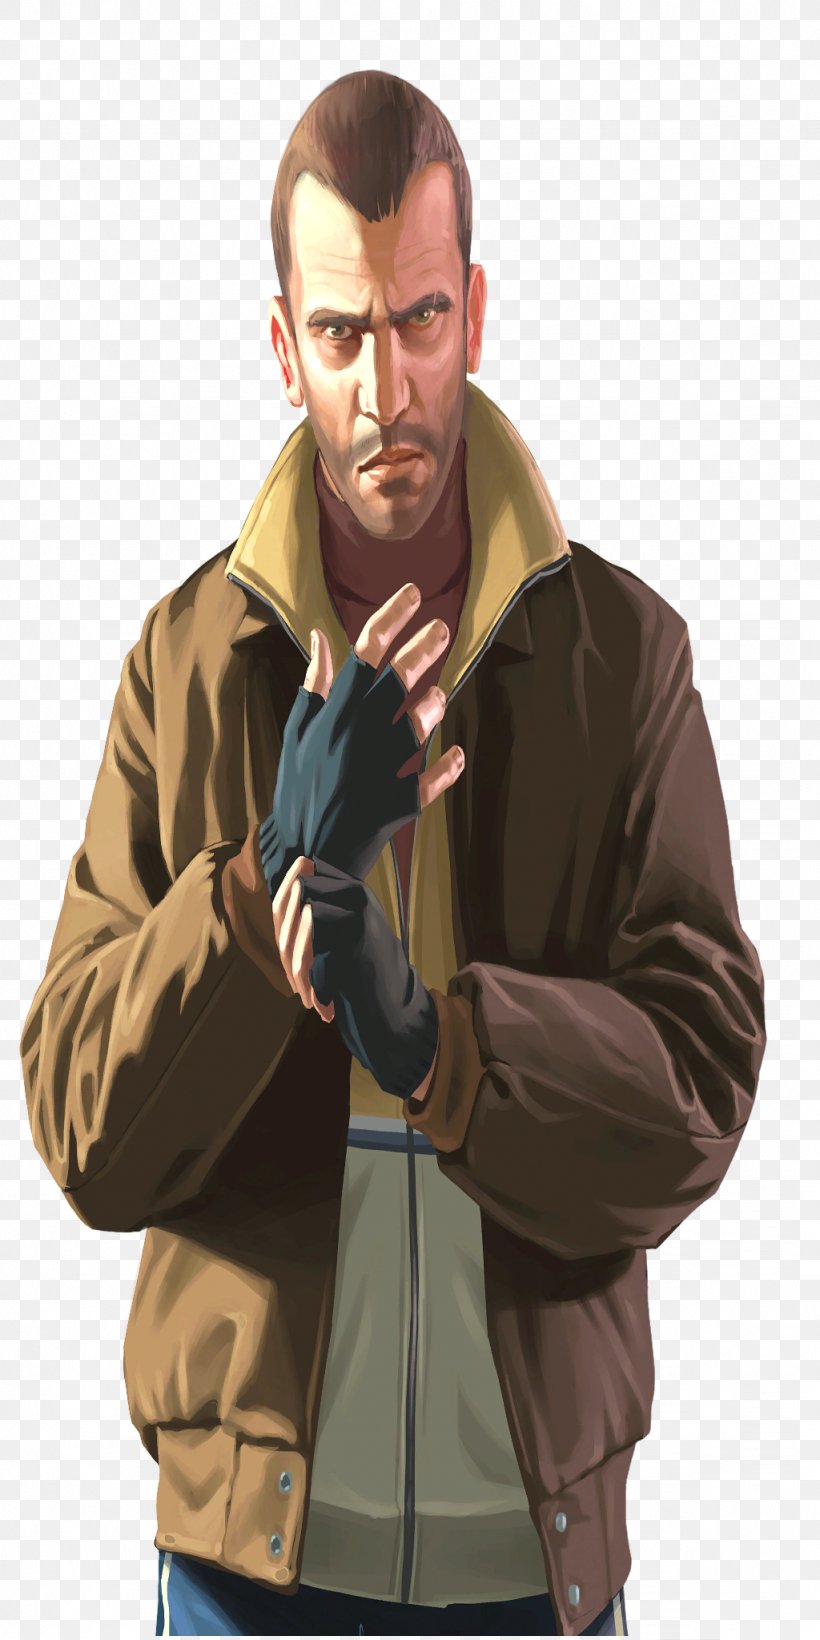 Grand Theft Auto: San Andreas Grand Theft Auto V Niko Bellic Grand Theft Auto: Episodes From Liberty City Grand Theft Auto III, PNG, 1024x2048px, Grand Theft Auto San Andreas, Cool, Facial Hair, Game, Gentleman Download Free